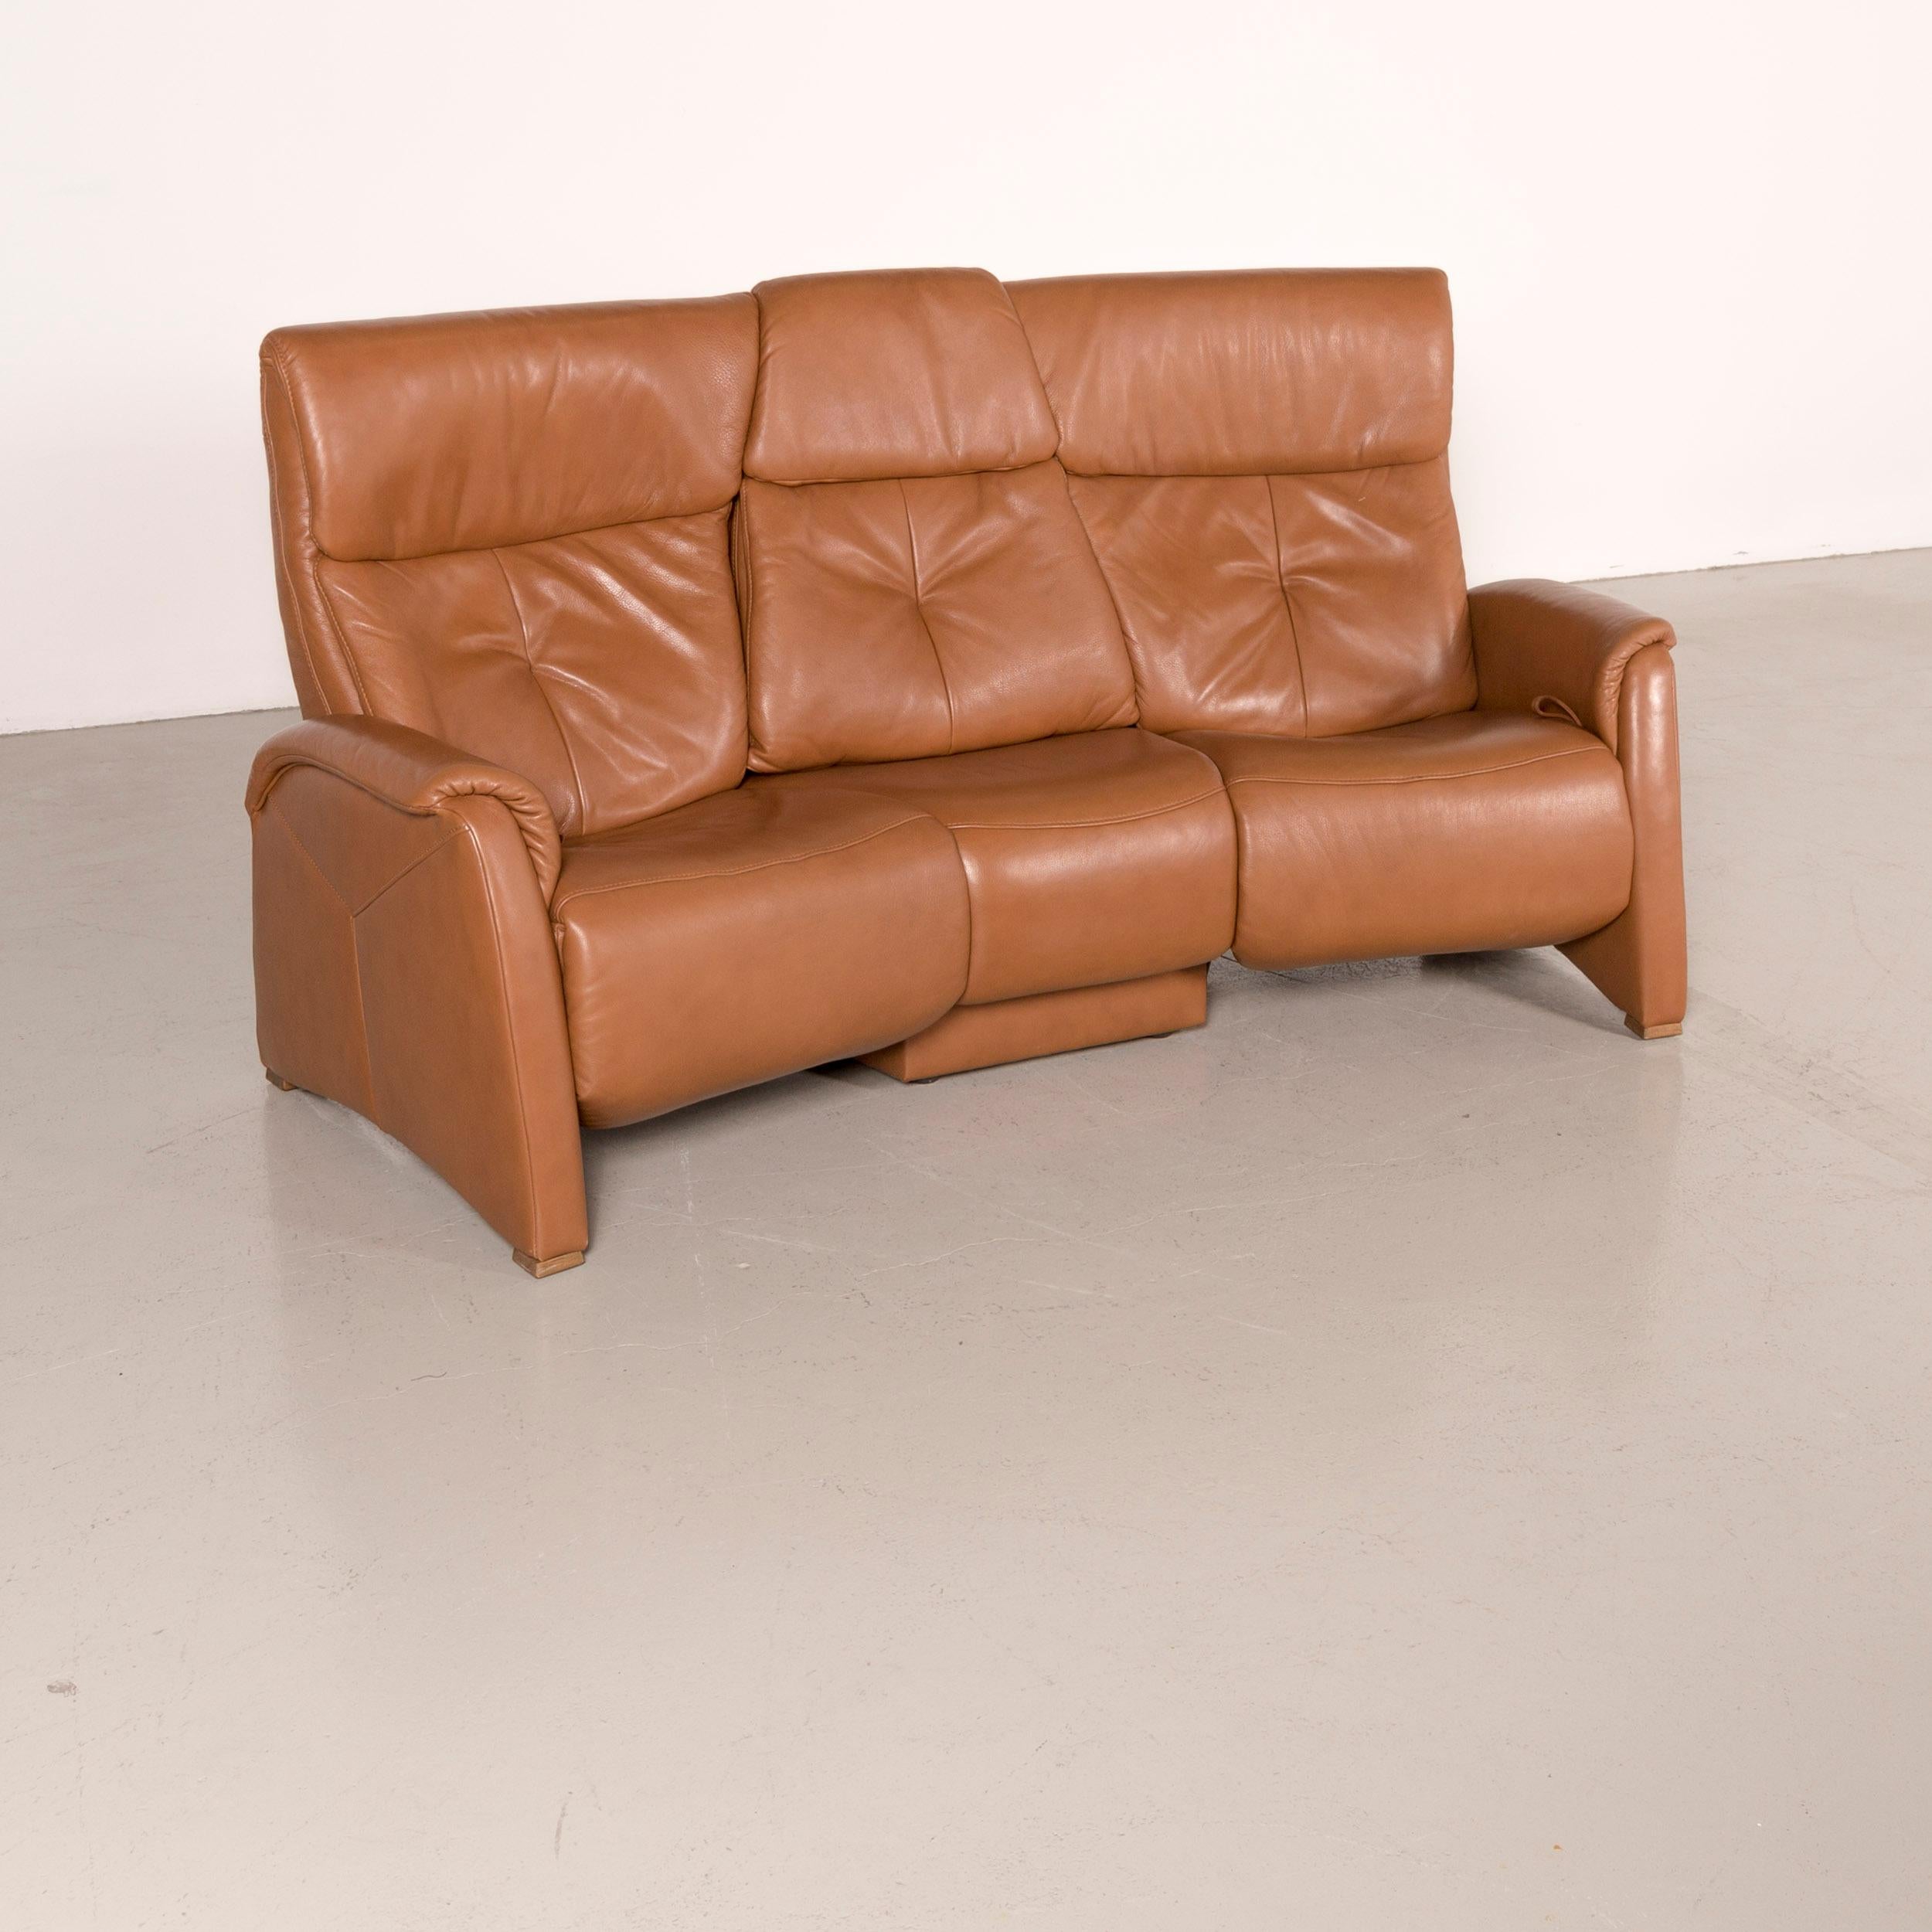 Himolla designer sofa brown leather three-seat couch recliner function.